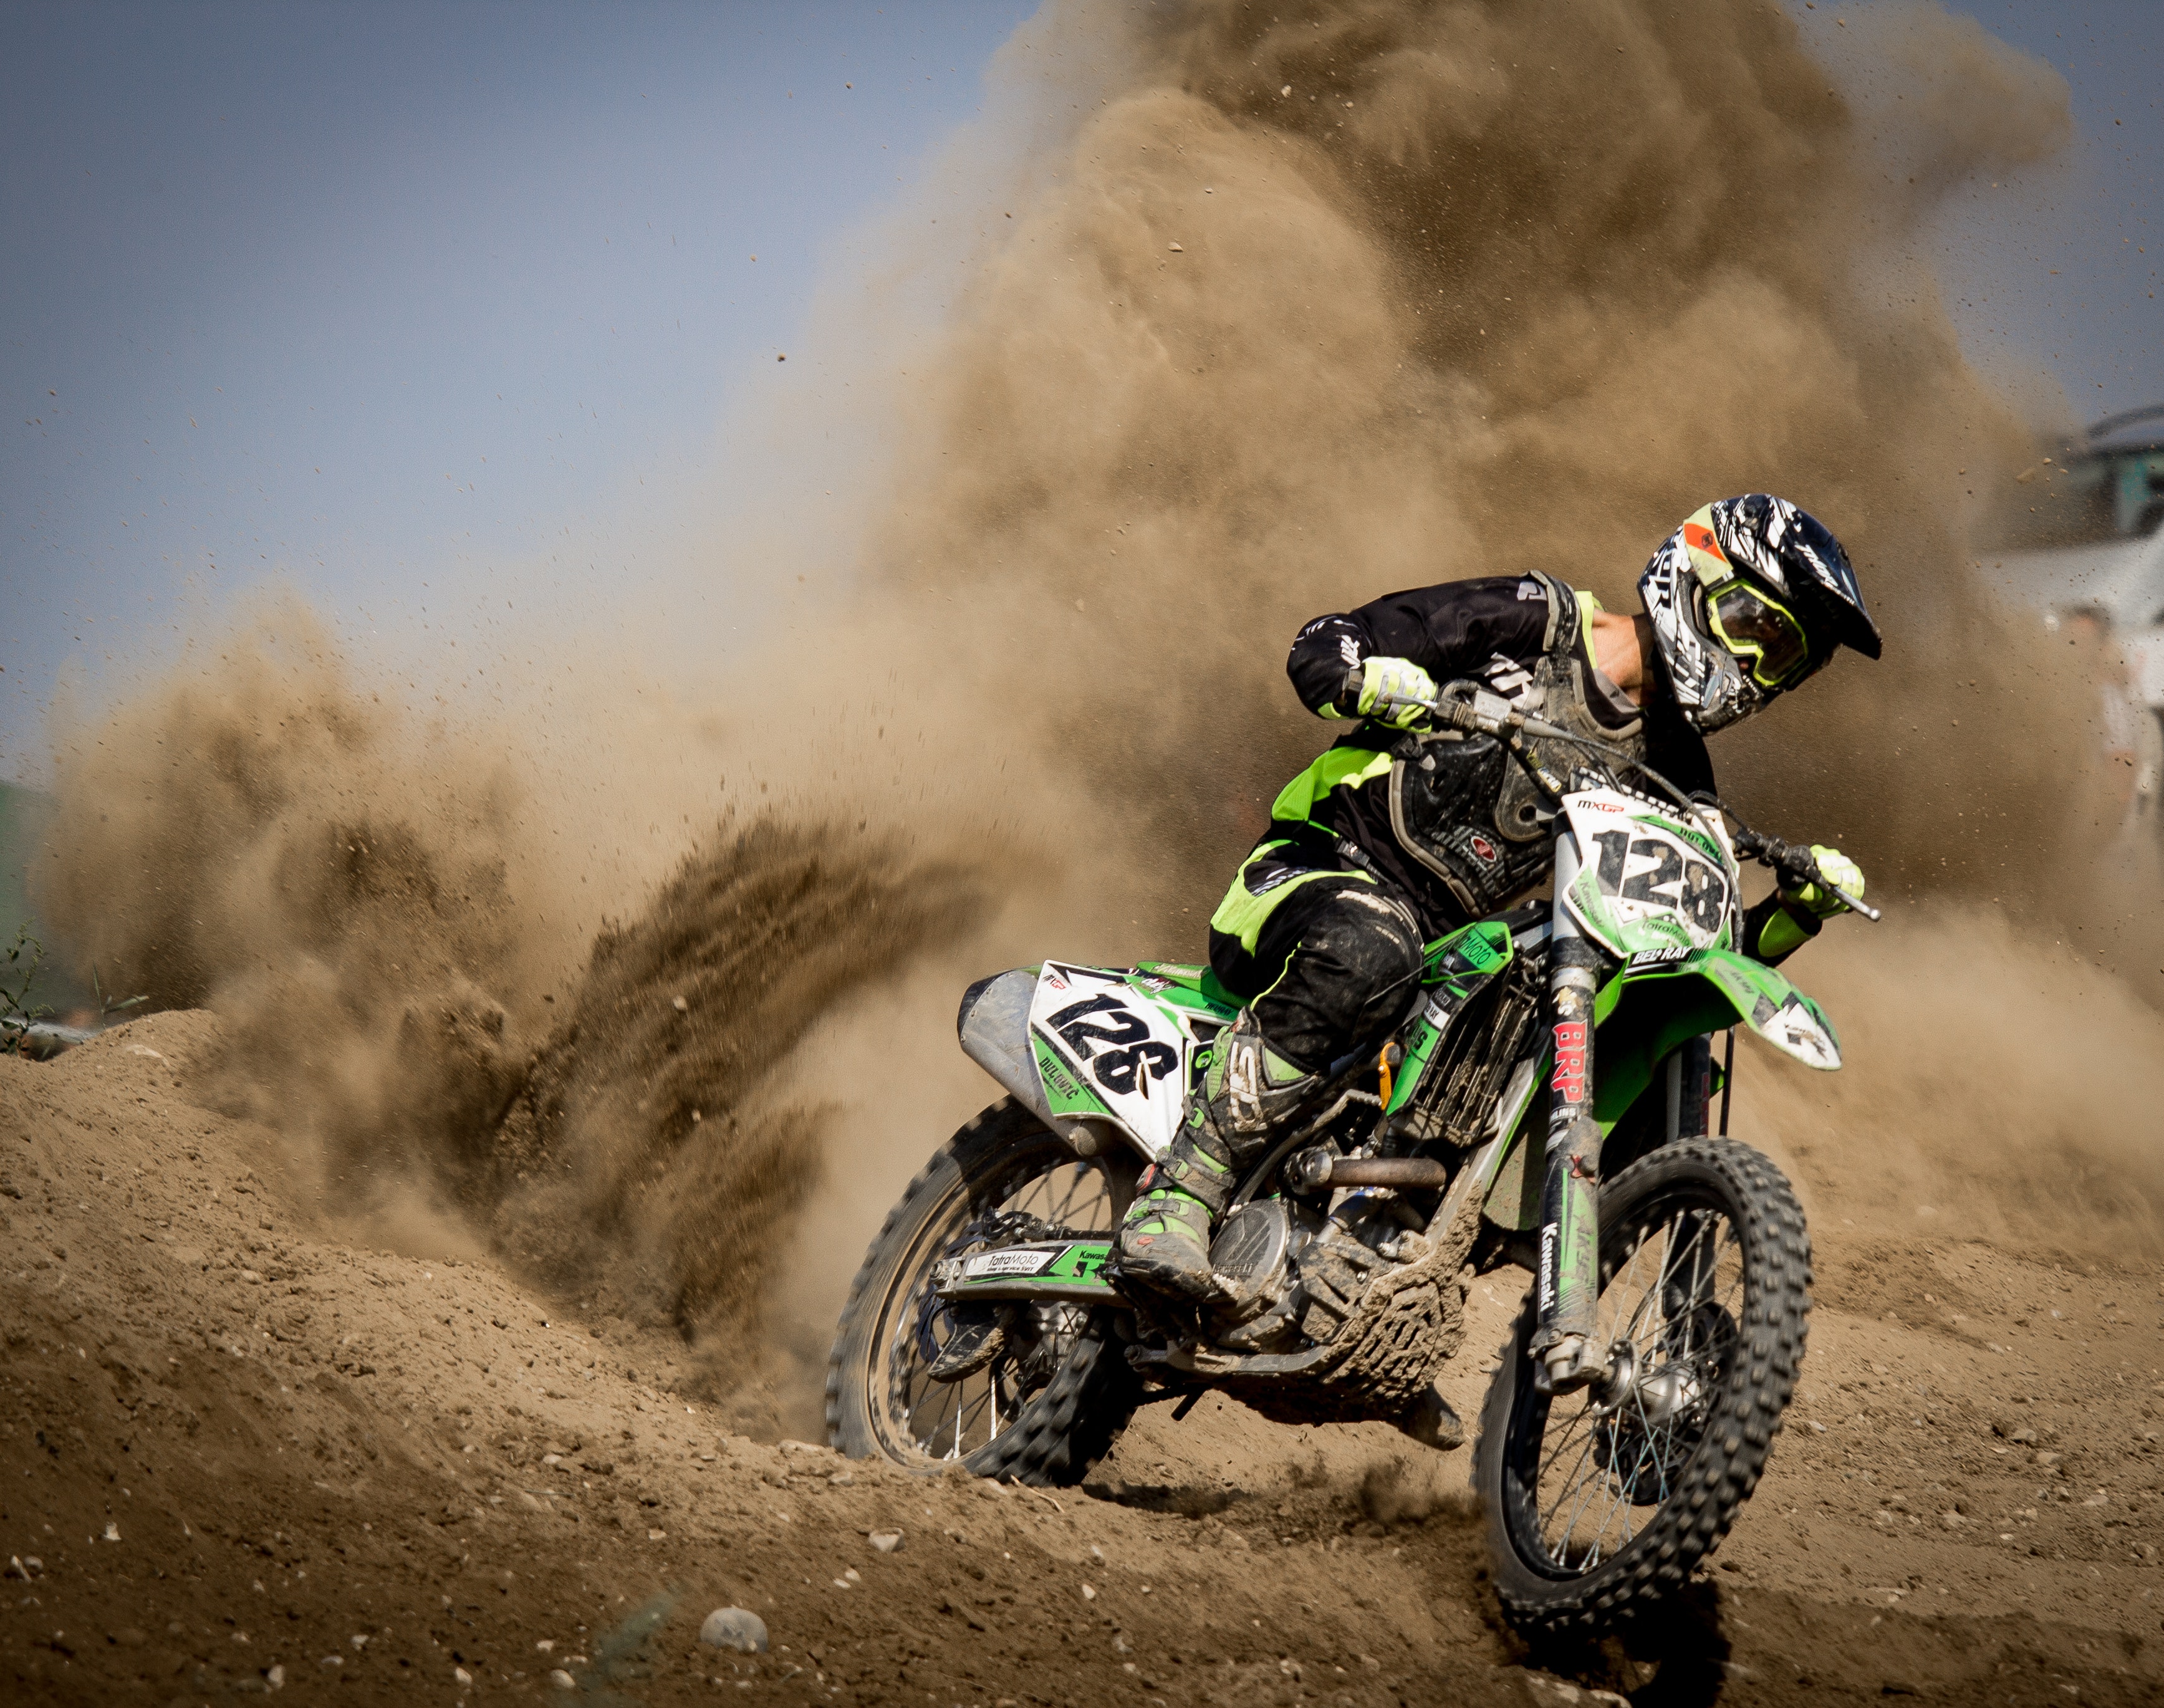 Rider Riding Green Motocross Dirt Bike, Action, Motorcyclist, Vehicle, Trail, HQ Photo